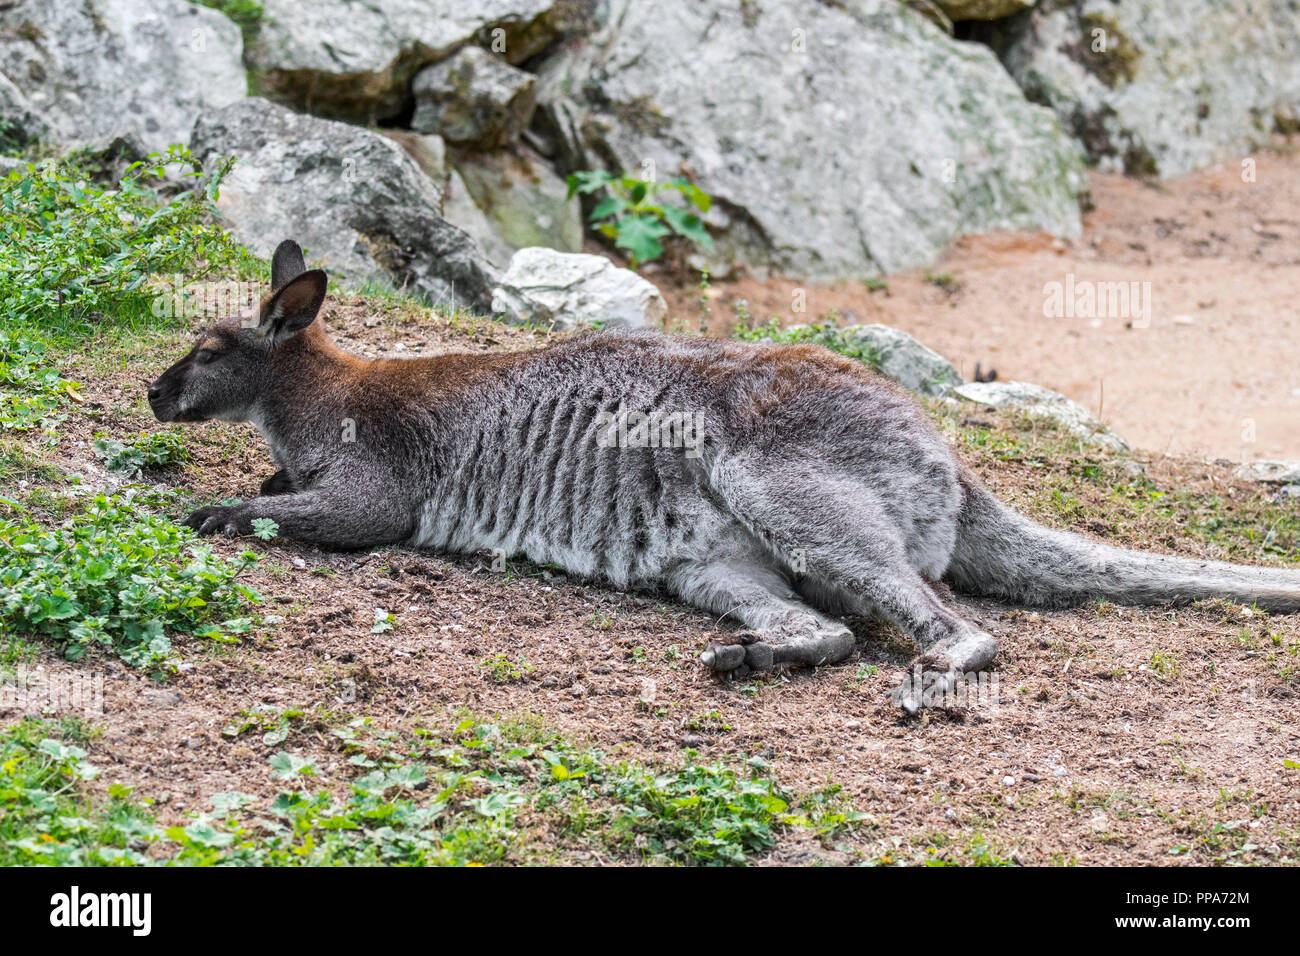 Red-necked wallaby / Bennett's wallaby (Macropus rufogriseus) native to Australia and Tasmania Stock Photo